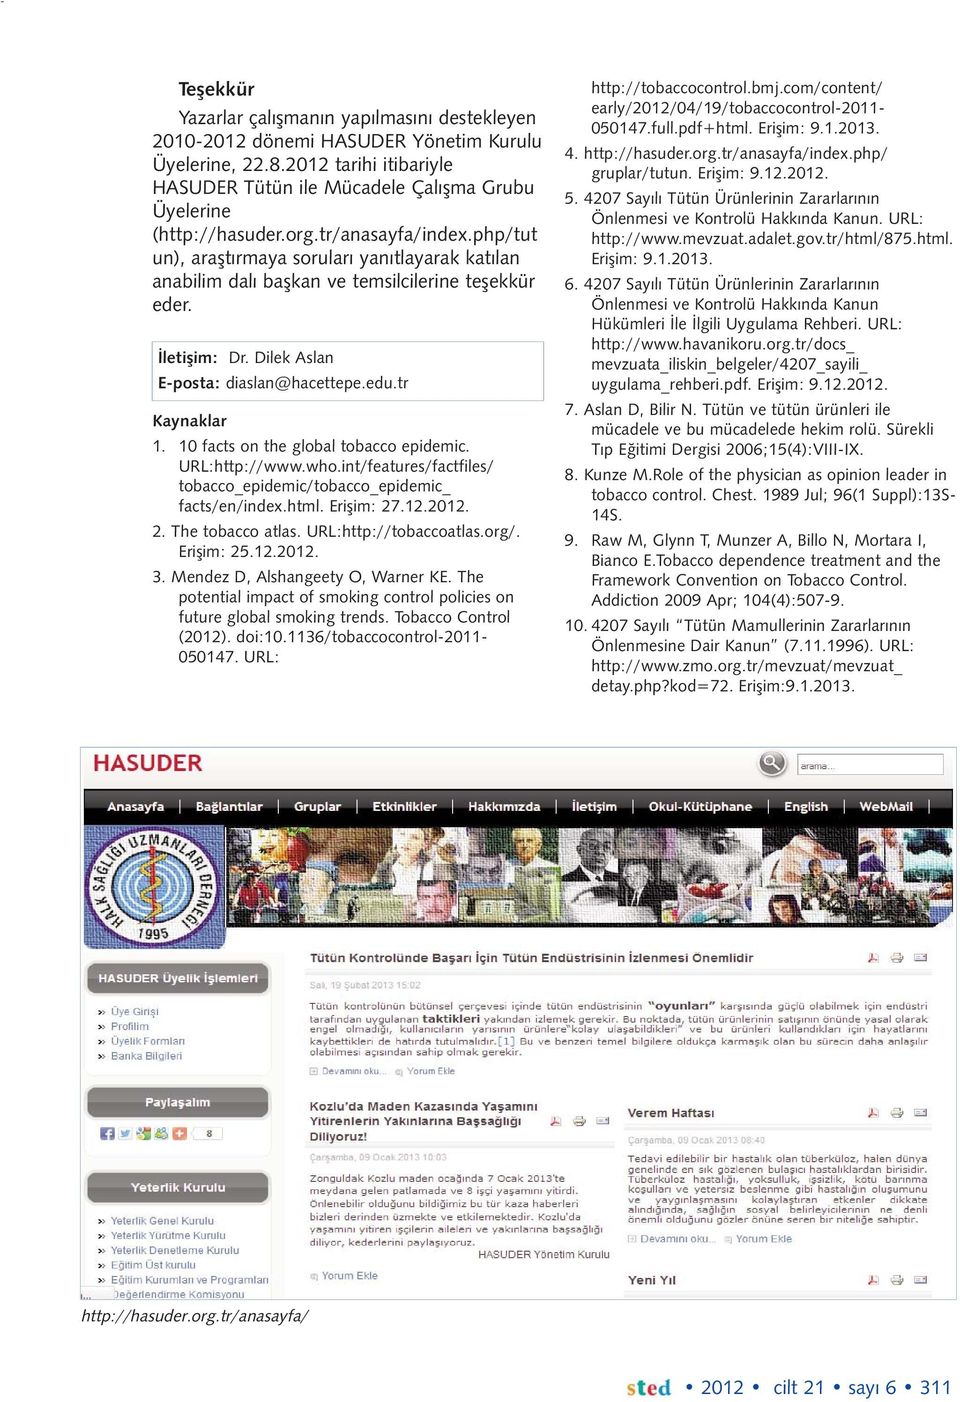 tr Kaynaklar 1. 10 facts on the global tobacco epidemic. URL:http://www.who.int/features/factfiles/ tobacco_epidemic/tobacco_epidemic_ facts/en/index.html. Erişim: 27.12.2012. 2. The tobacco atlas.